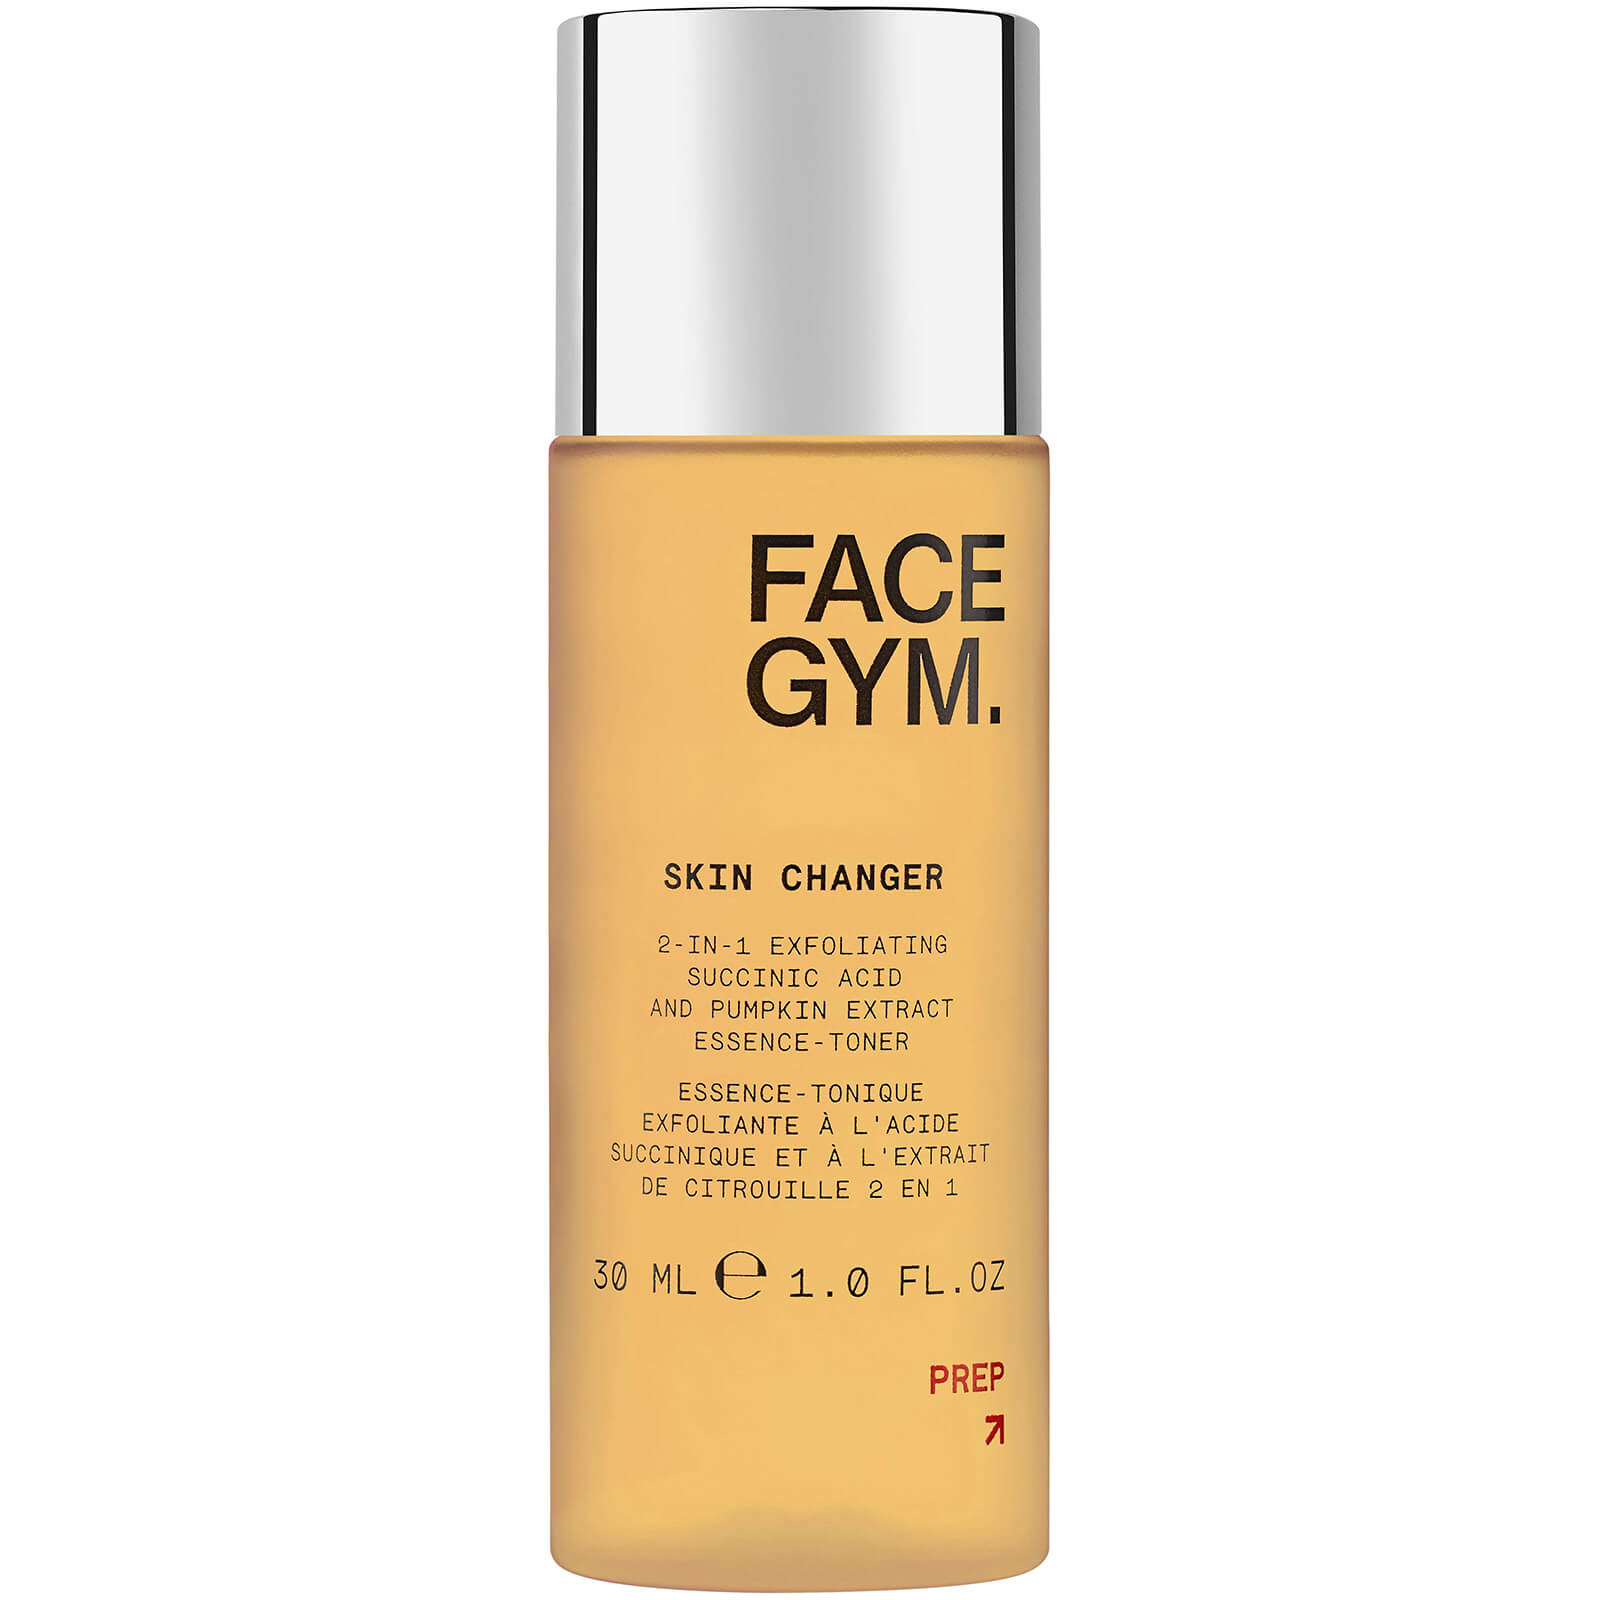 FaceGym Skin Changer 2-in-1 Exfoliating Succinic Acid and Pumpkin Extract Essence Toner (Various Sizes) - 30ml